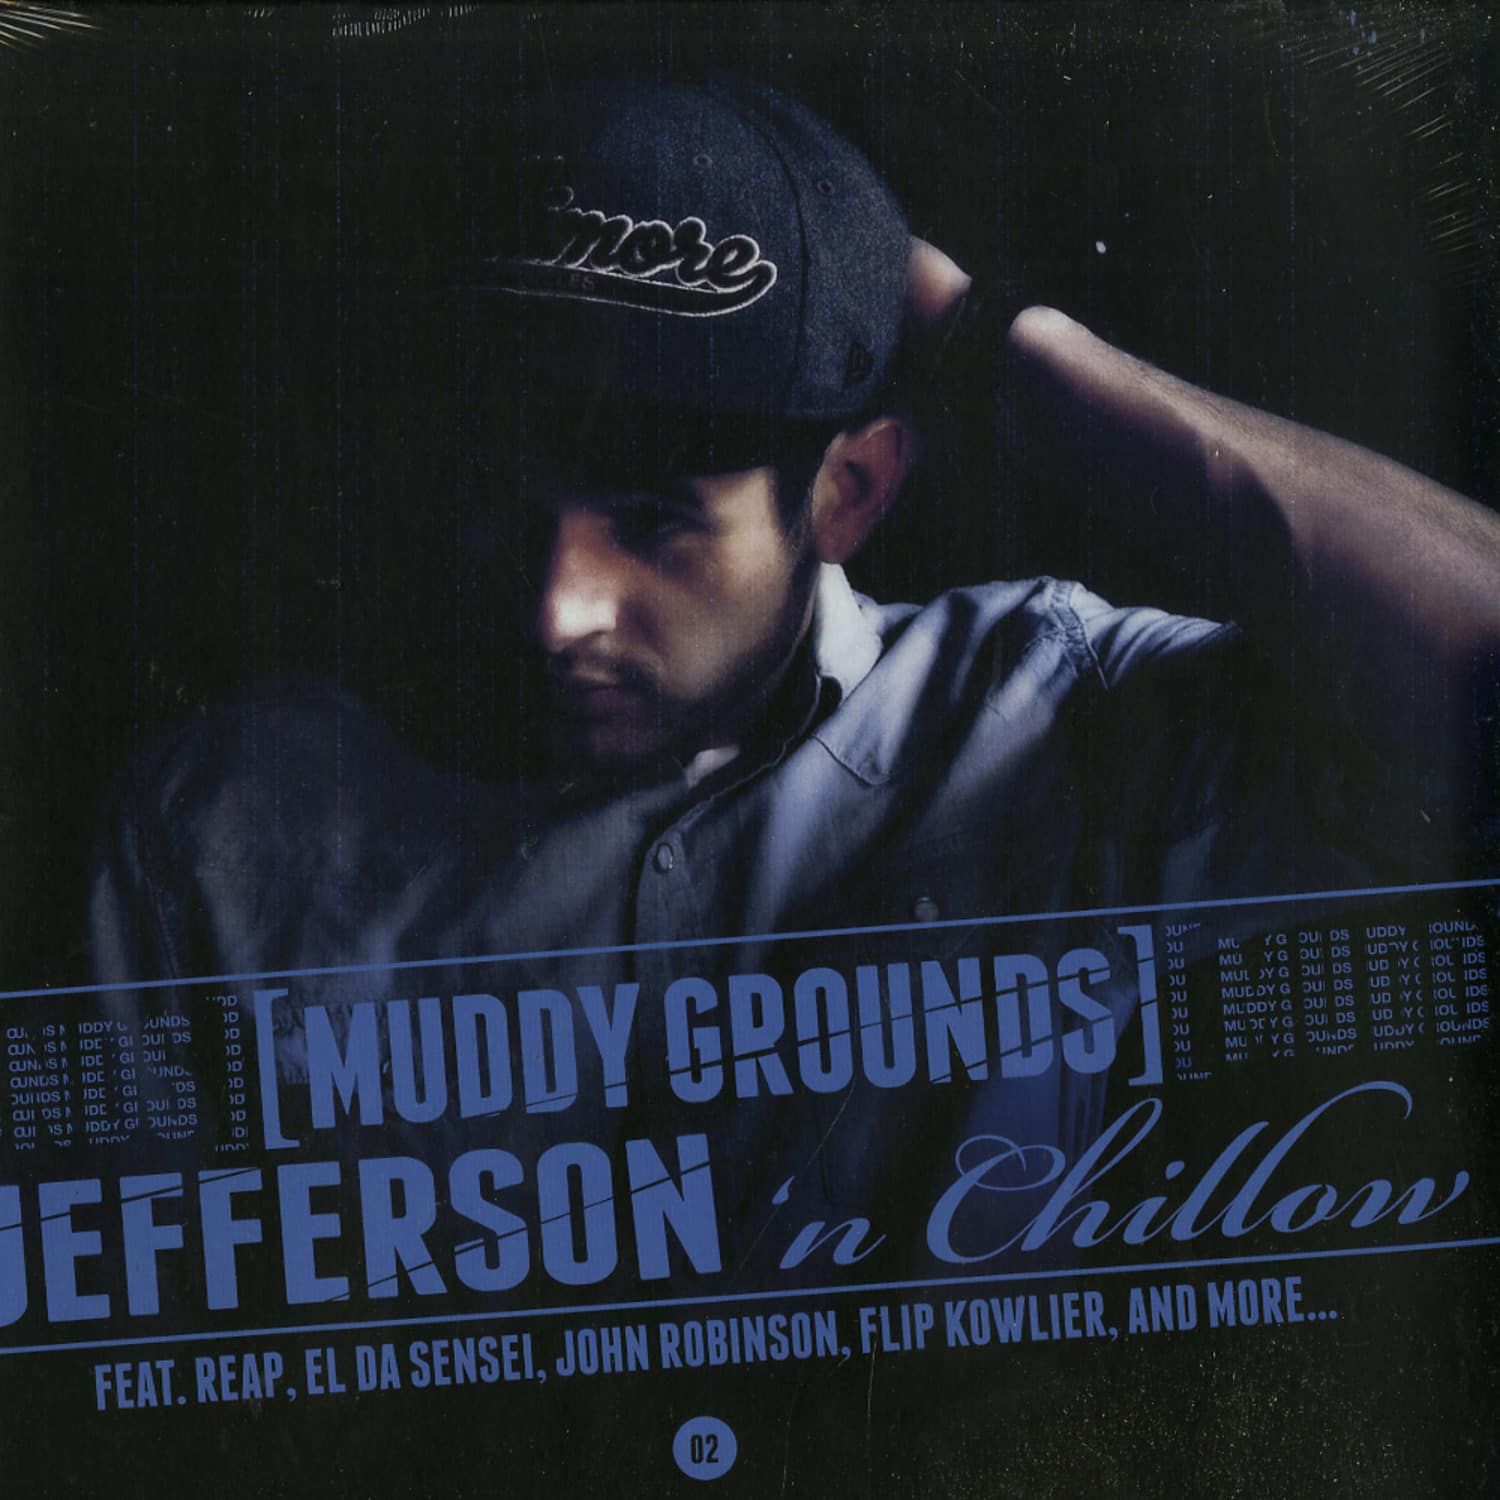 Jefferson N Chillow - MUDDY GROUNDS 